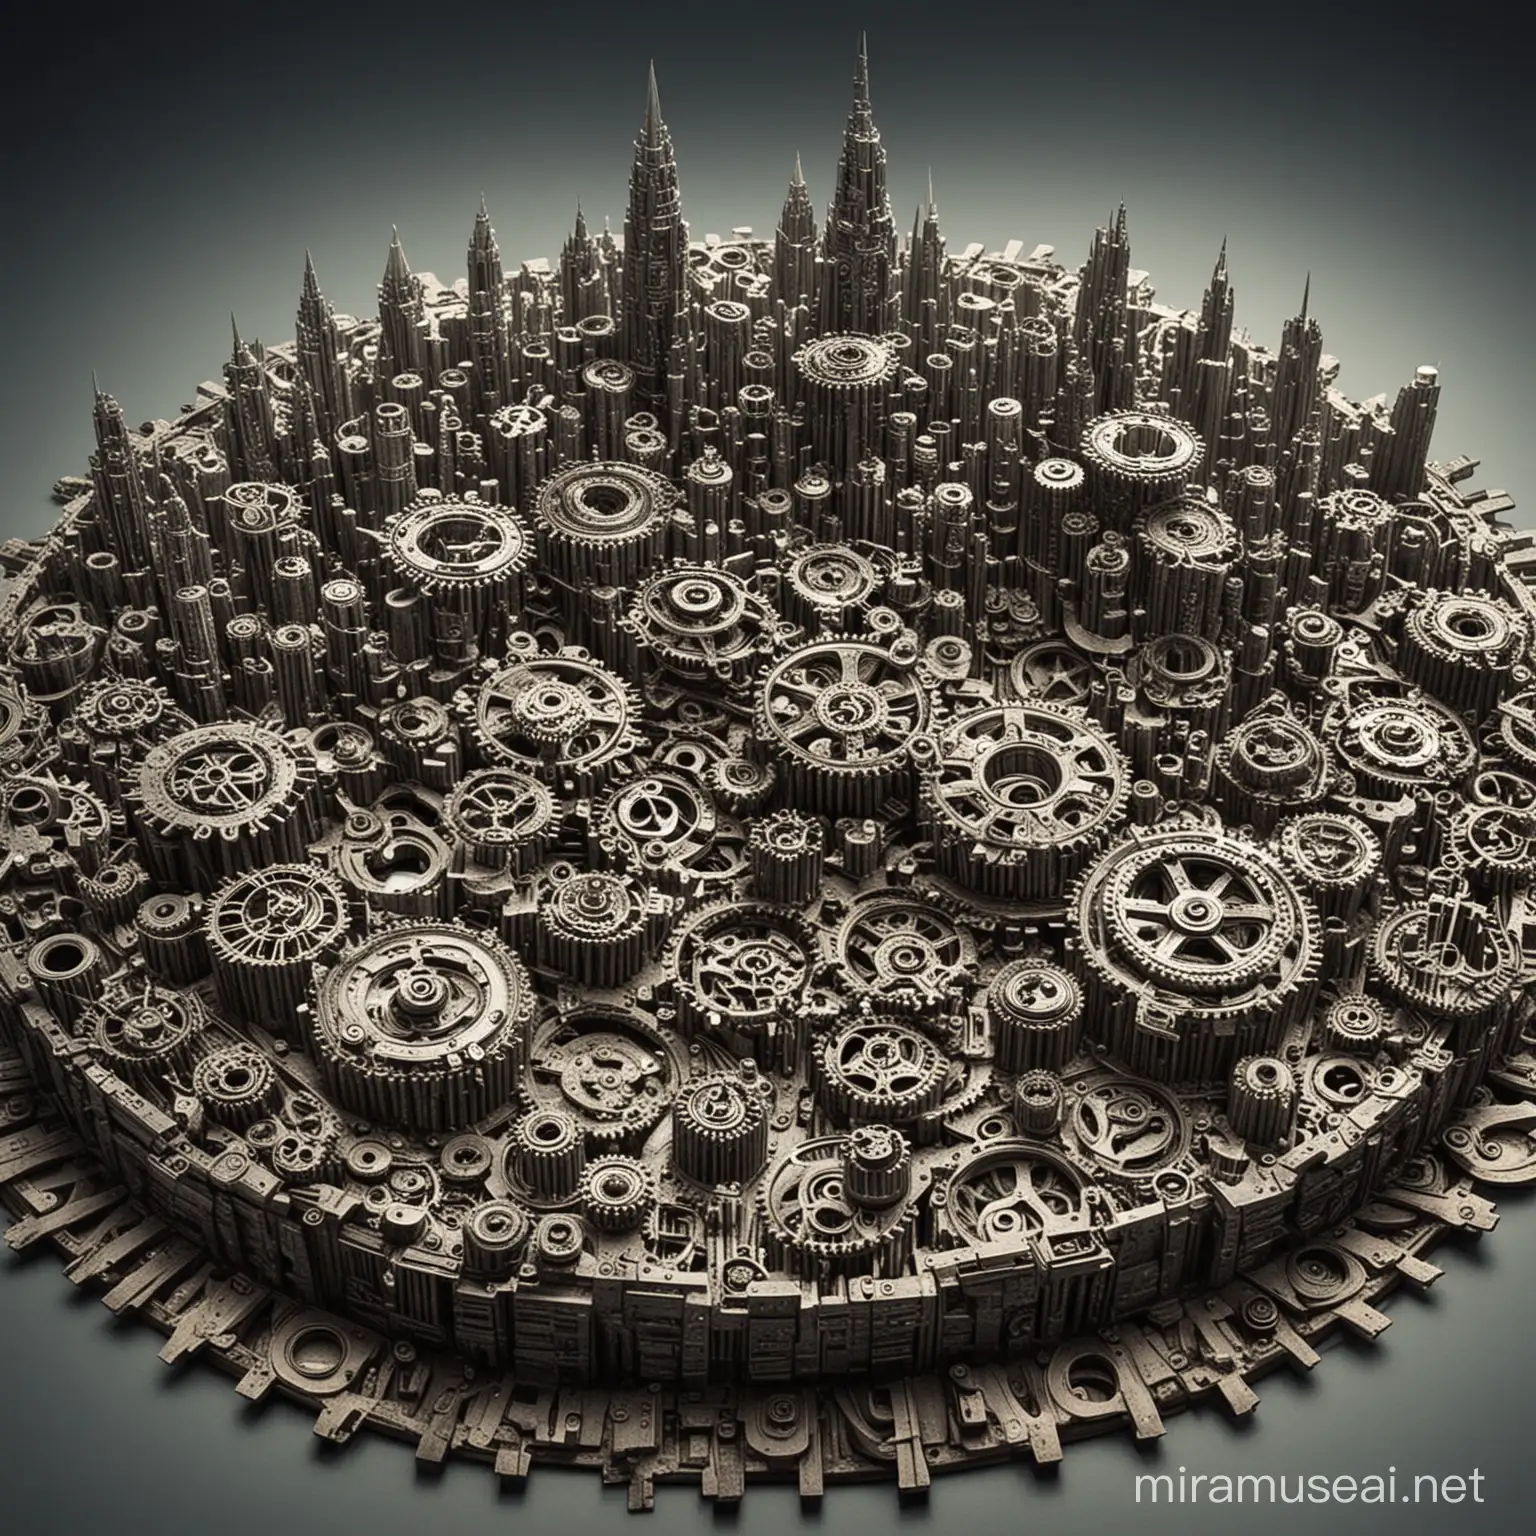 City made from gears 
